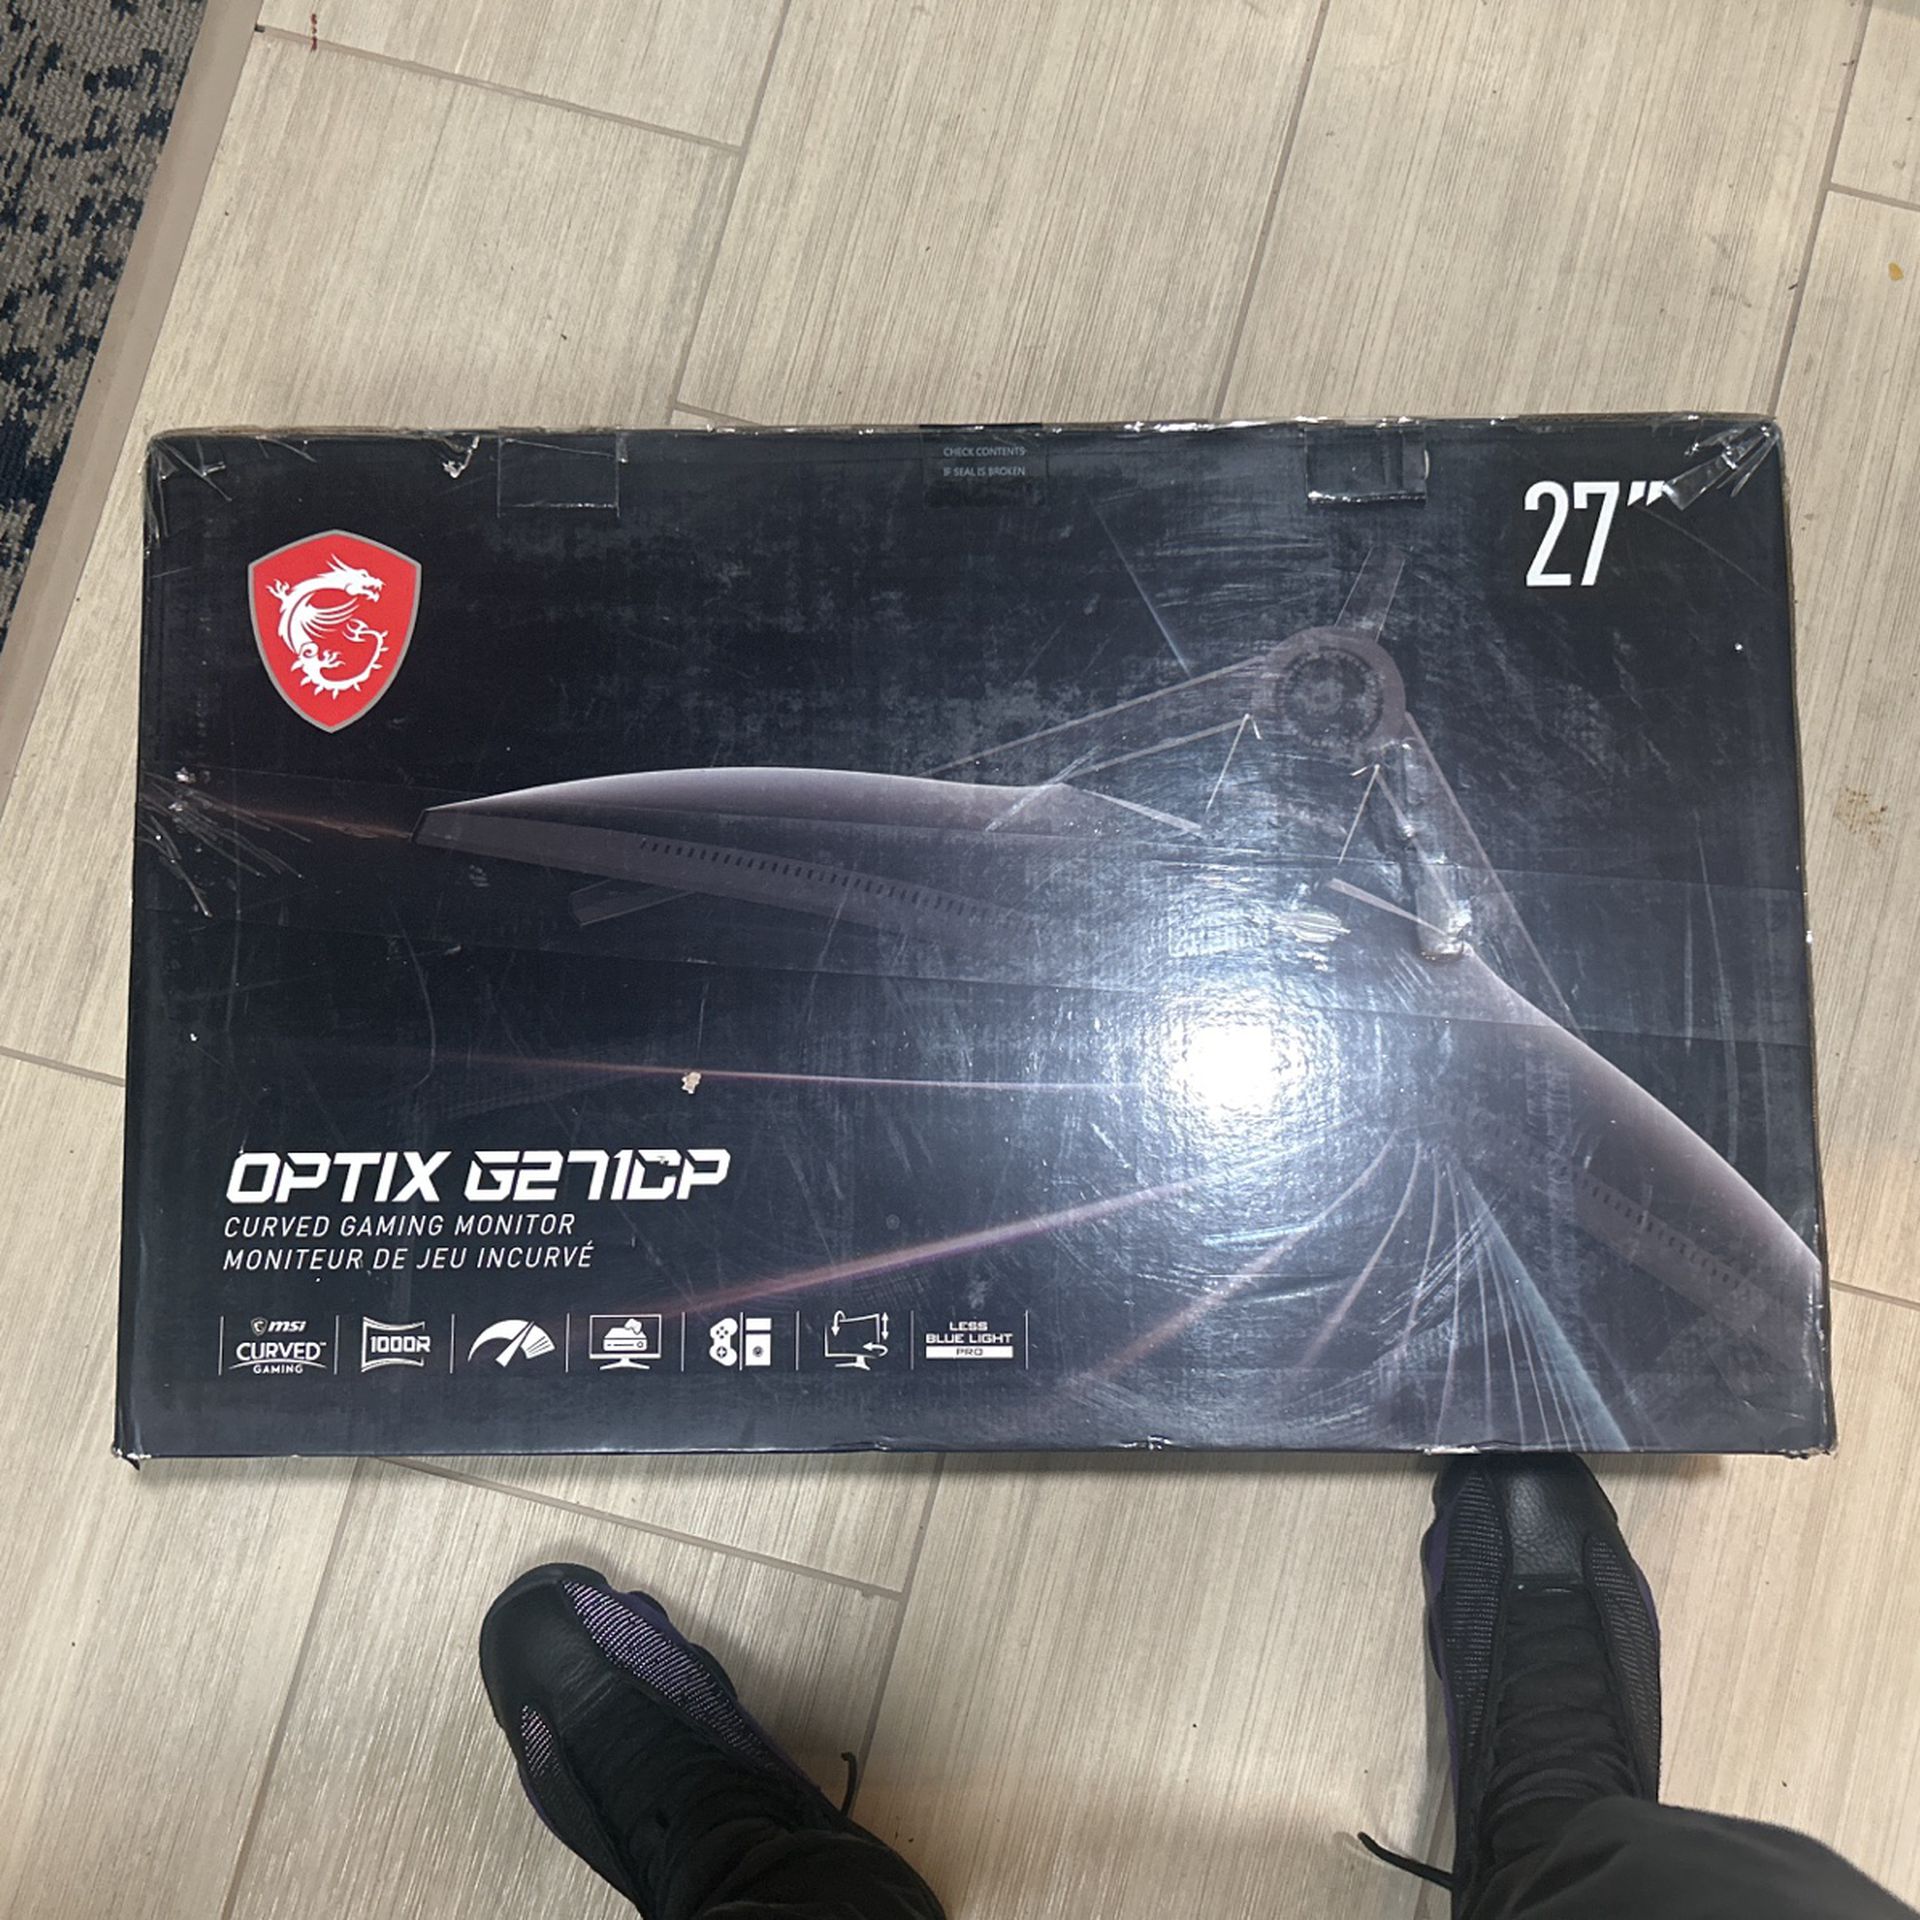 MSI CURVED GAMING MONITOR 27”